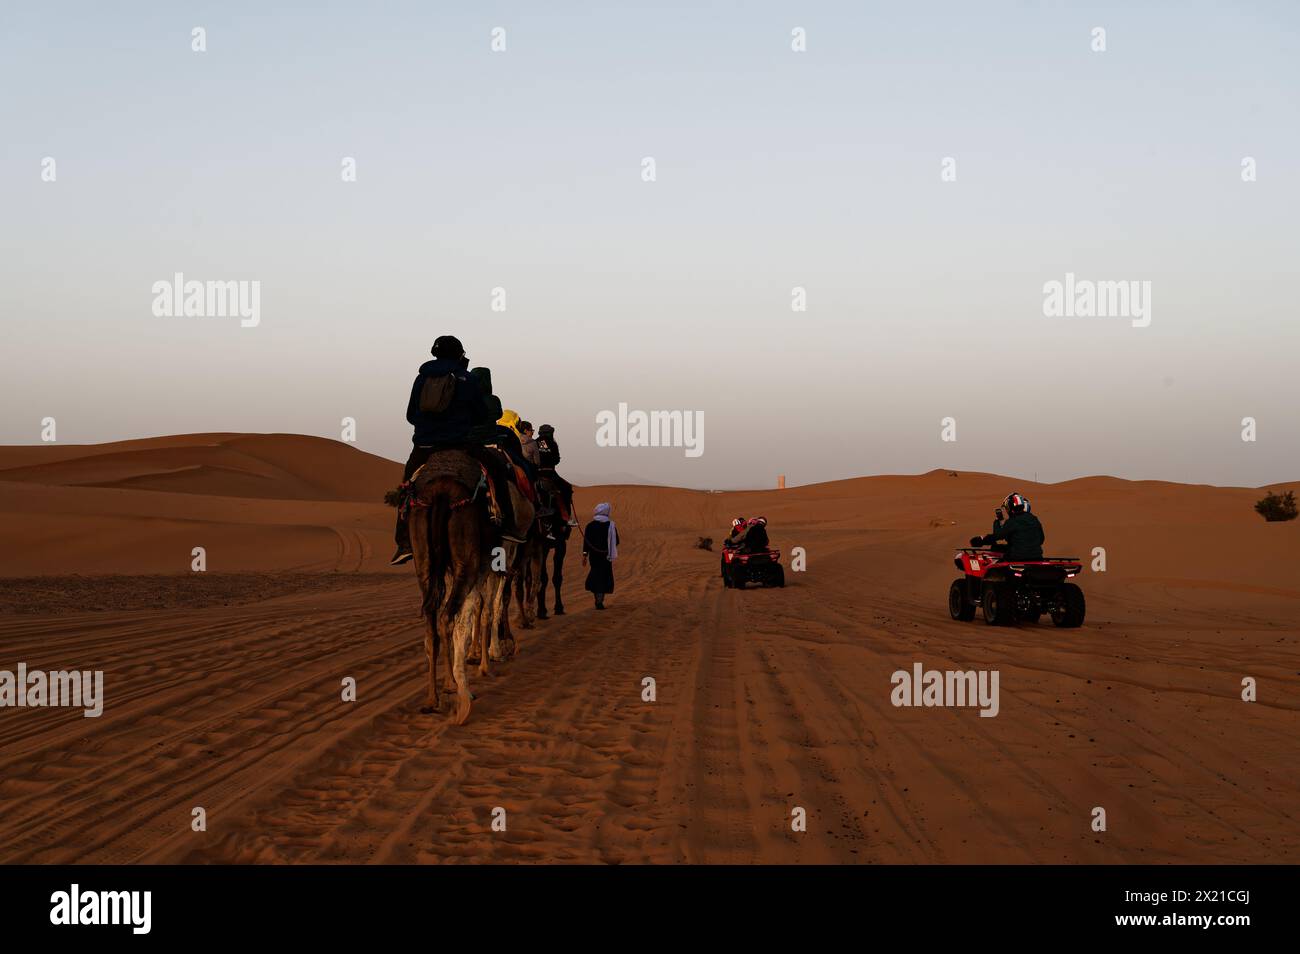 Caravan of camels treks along the left side of a makeshift sand road in the merzouga desert, while quad bikes speed by on the right. Stock Photo